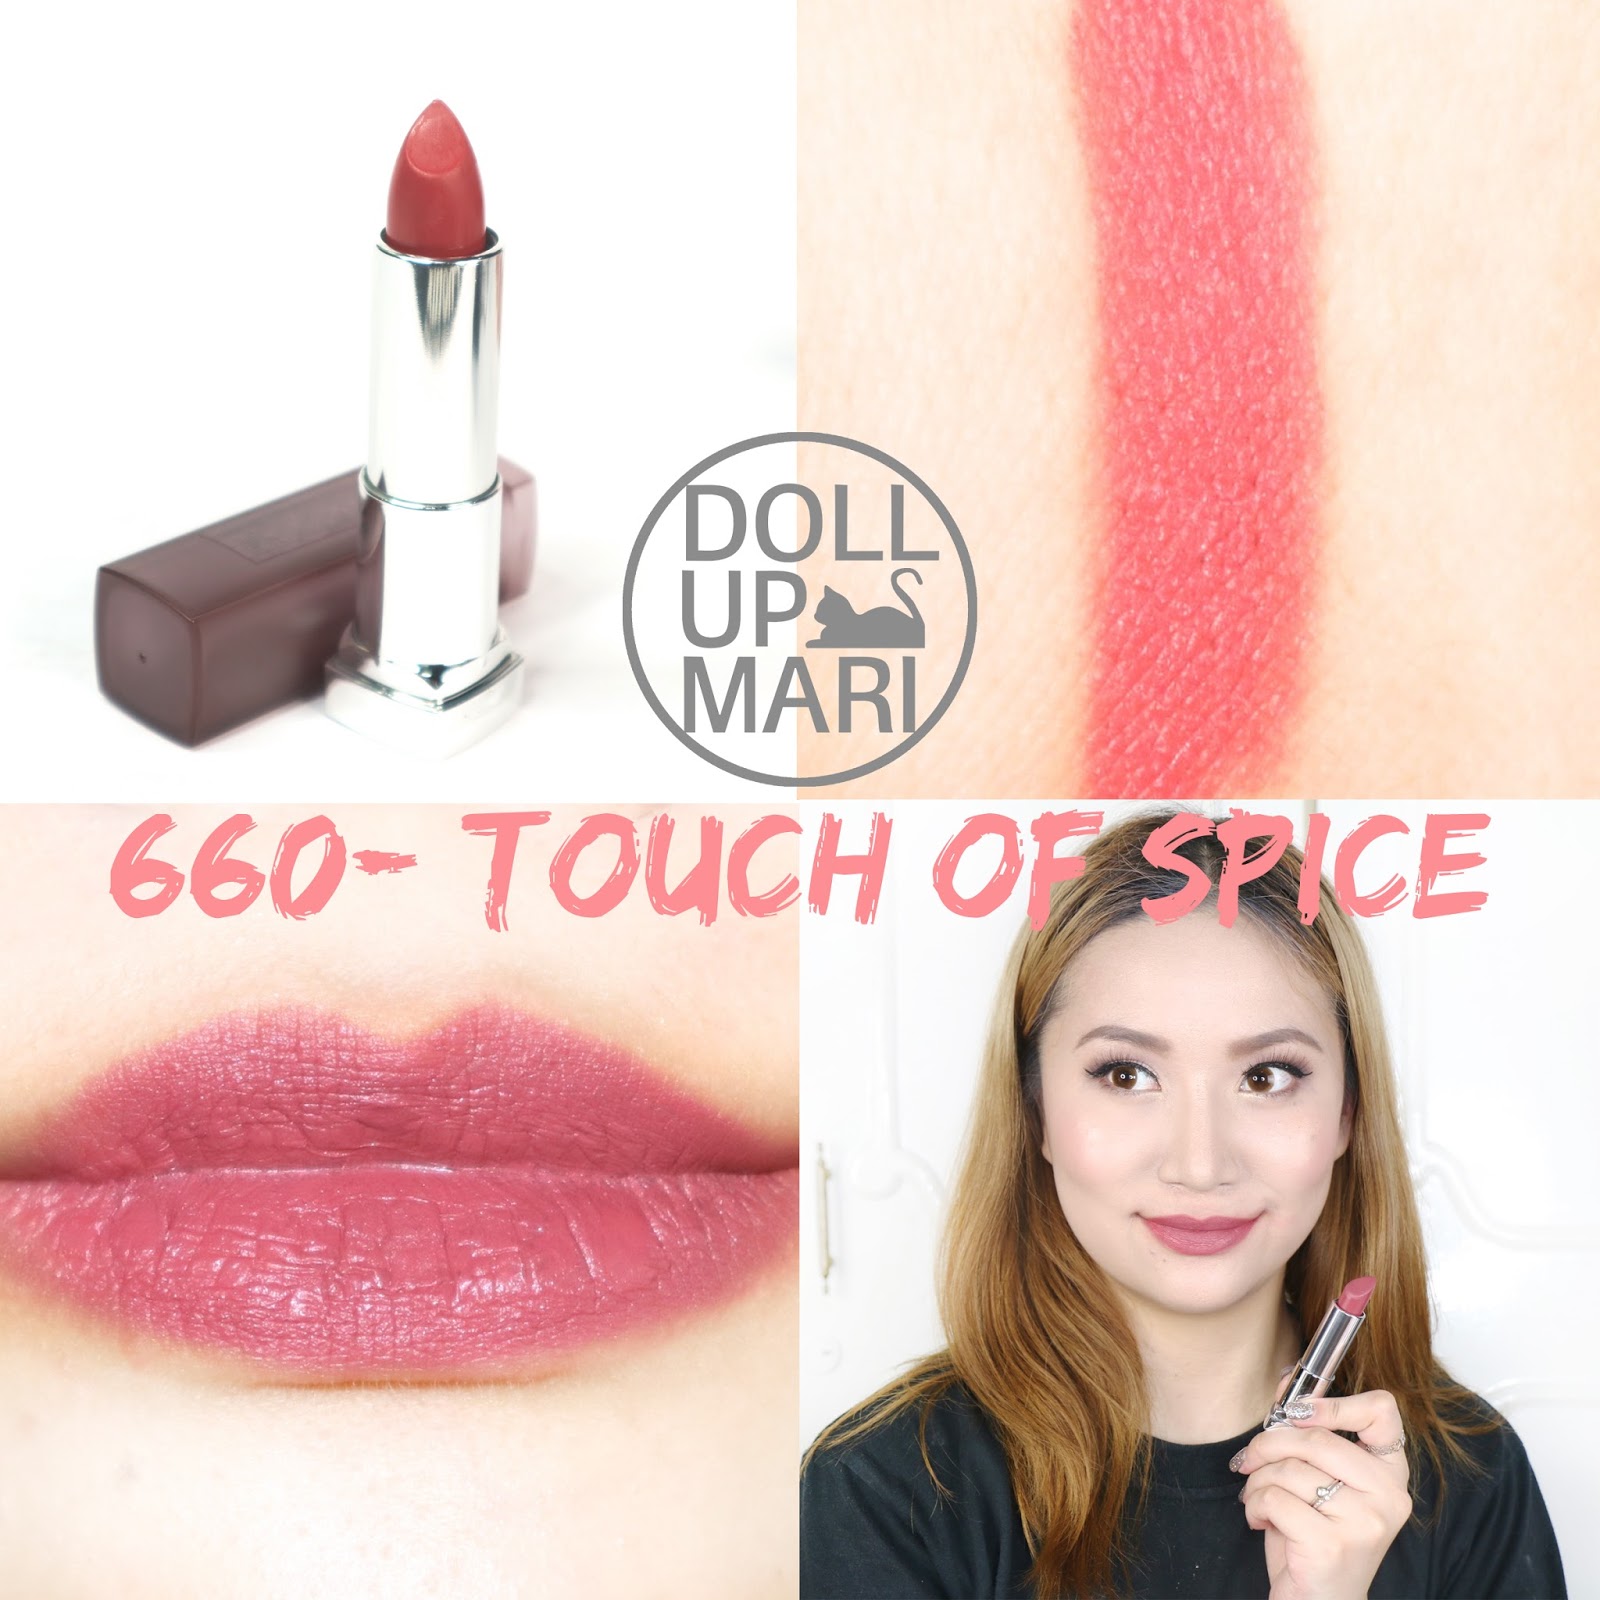 Maybelline Philippines Creamy Mattes 660 Touch of Spice Swatches.